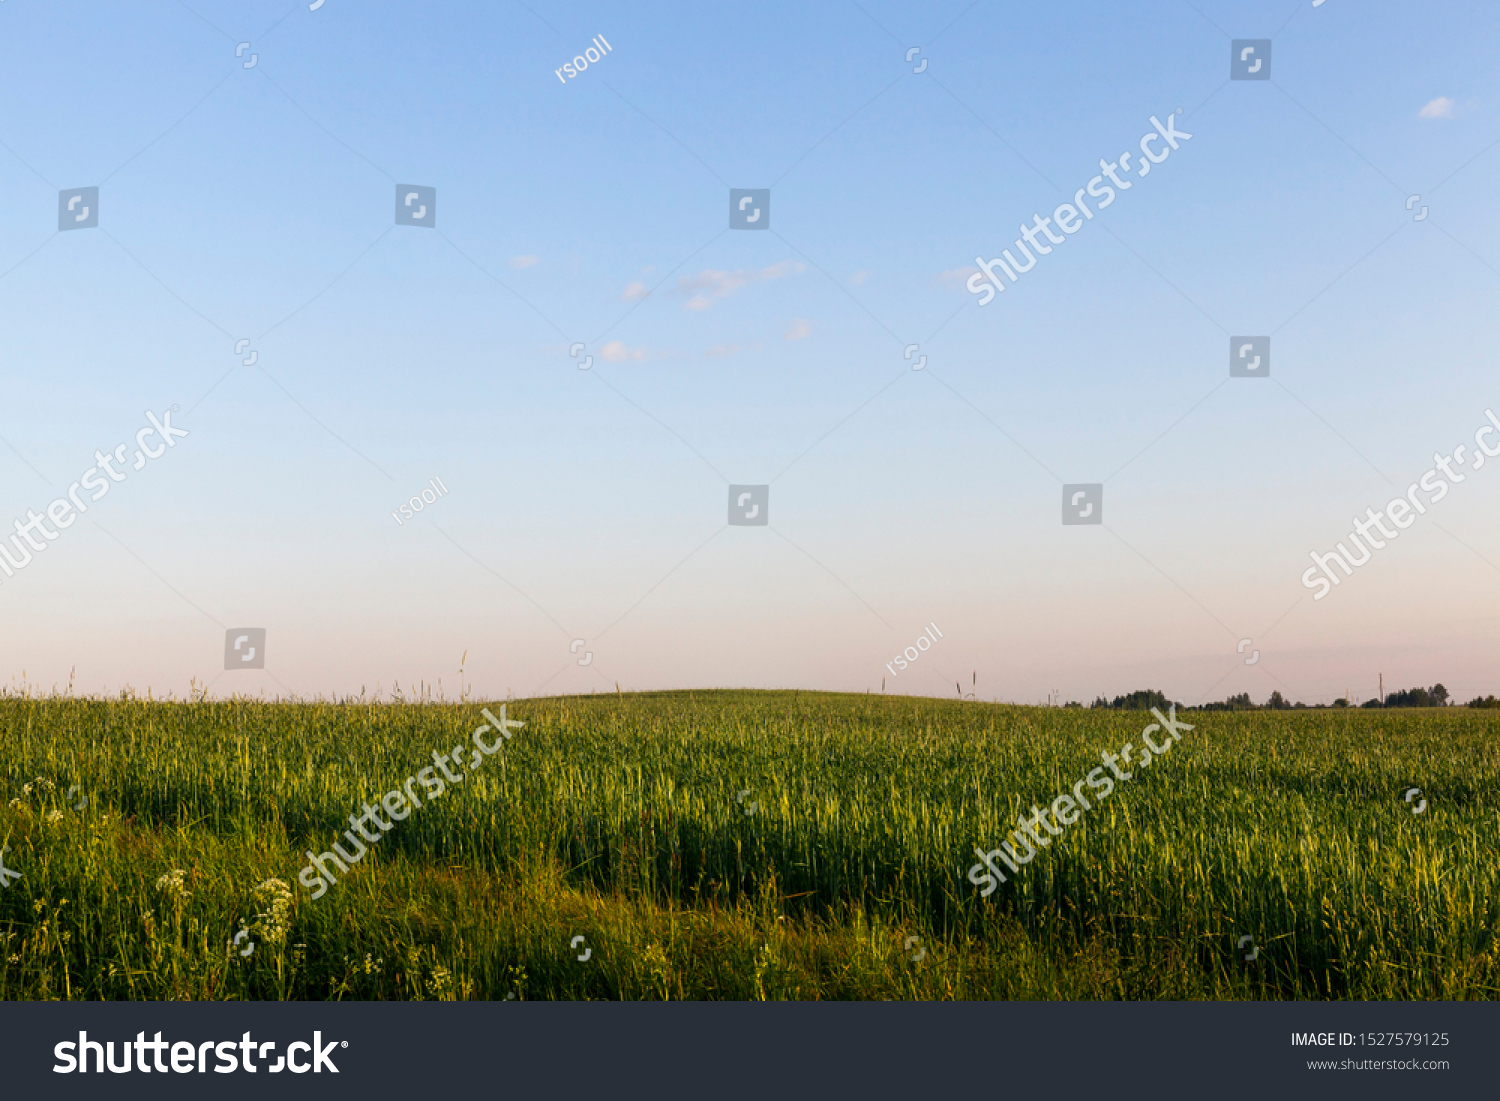 green grass in summer, landscape near agricultural field, European countries of Eastern Europe #1527579125